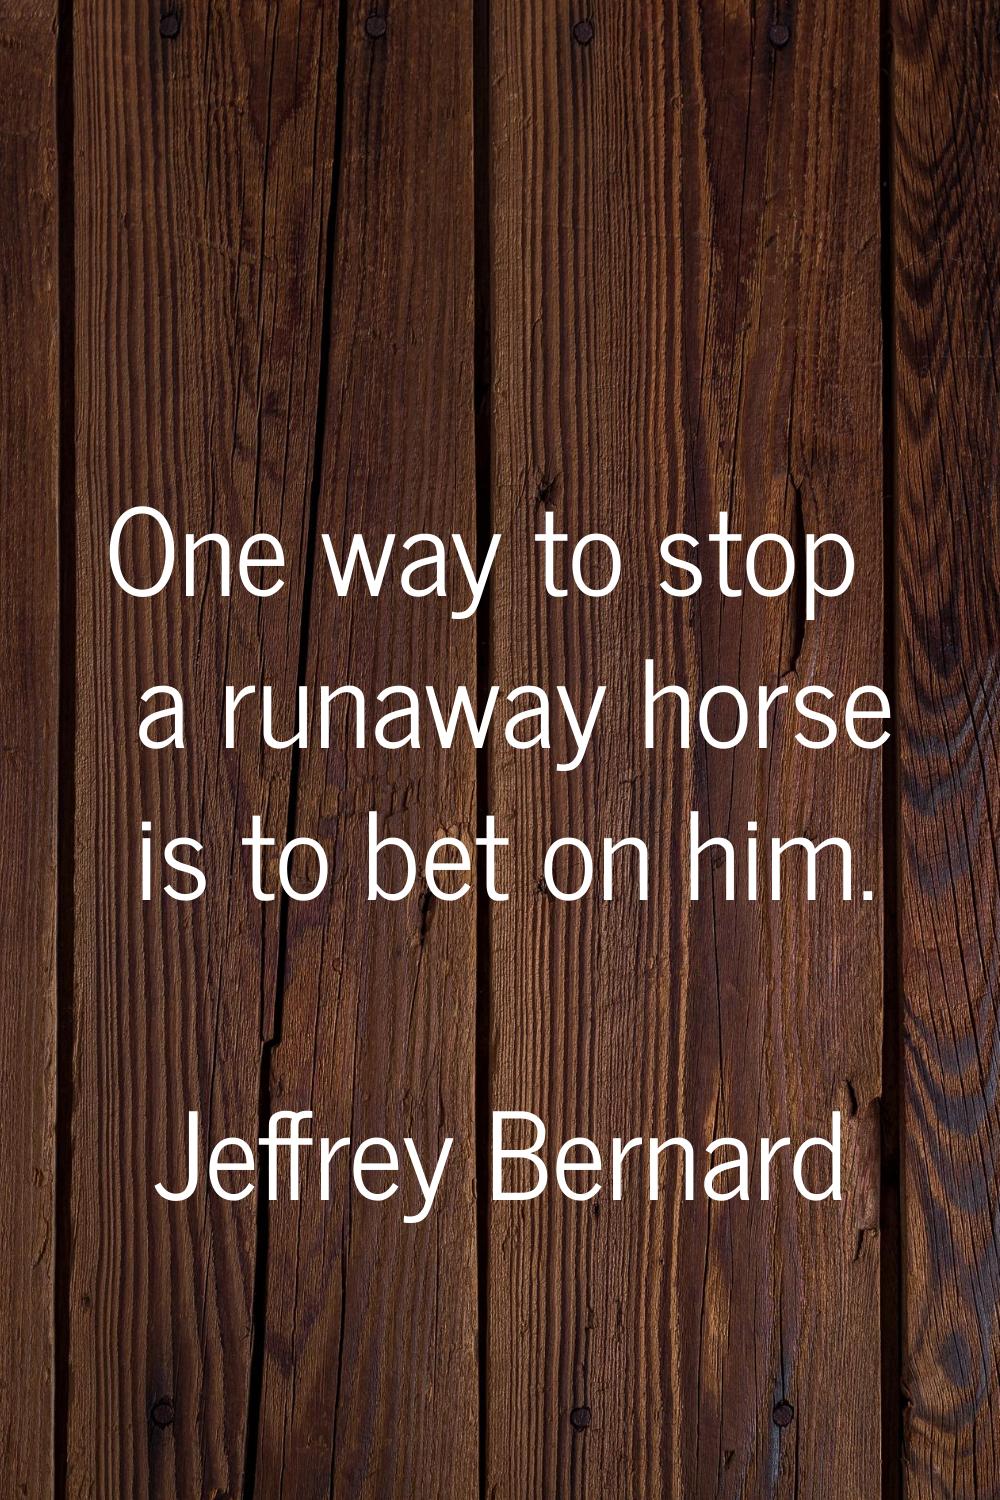 One way to stop a runaway horse is to bet on him.